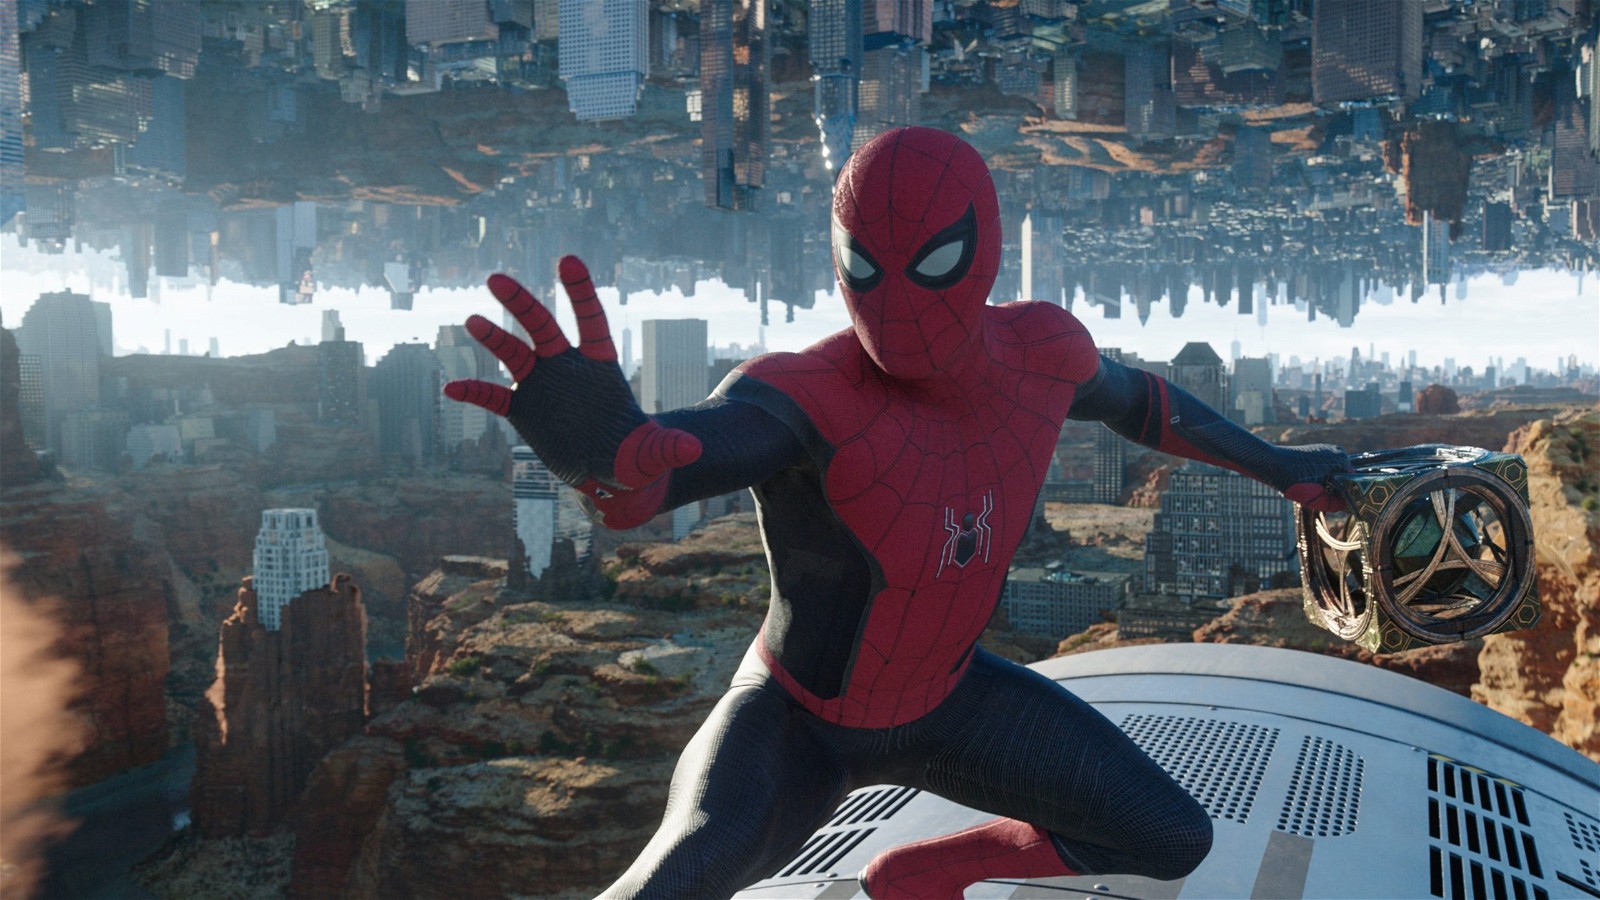 After Spider-Man: No Way Home, Tom Holland wants the next film to be another great addition to the franchise